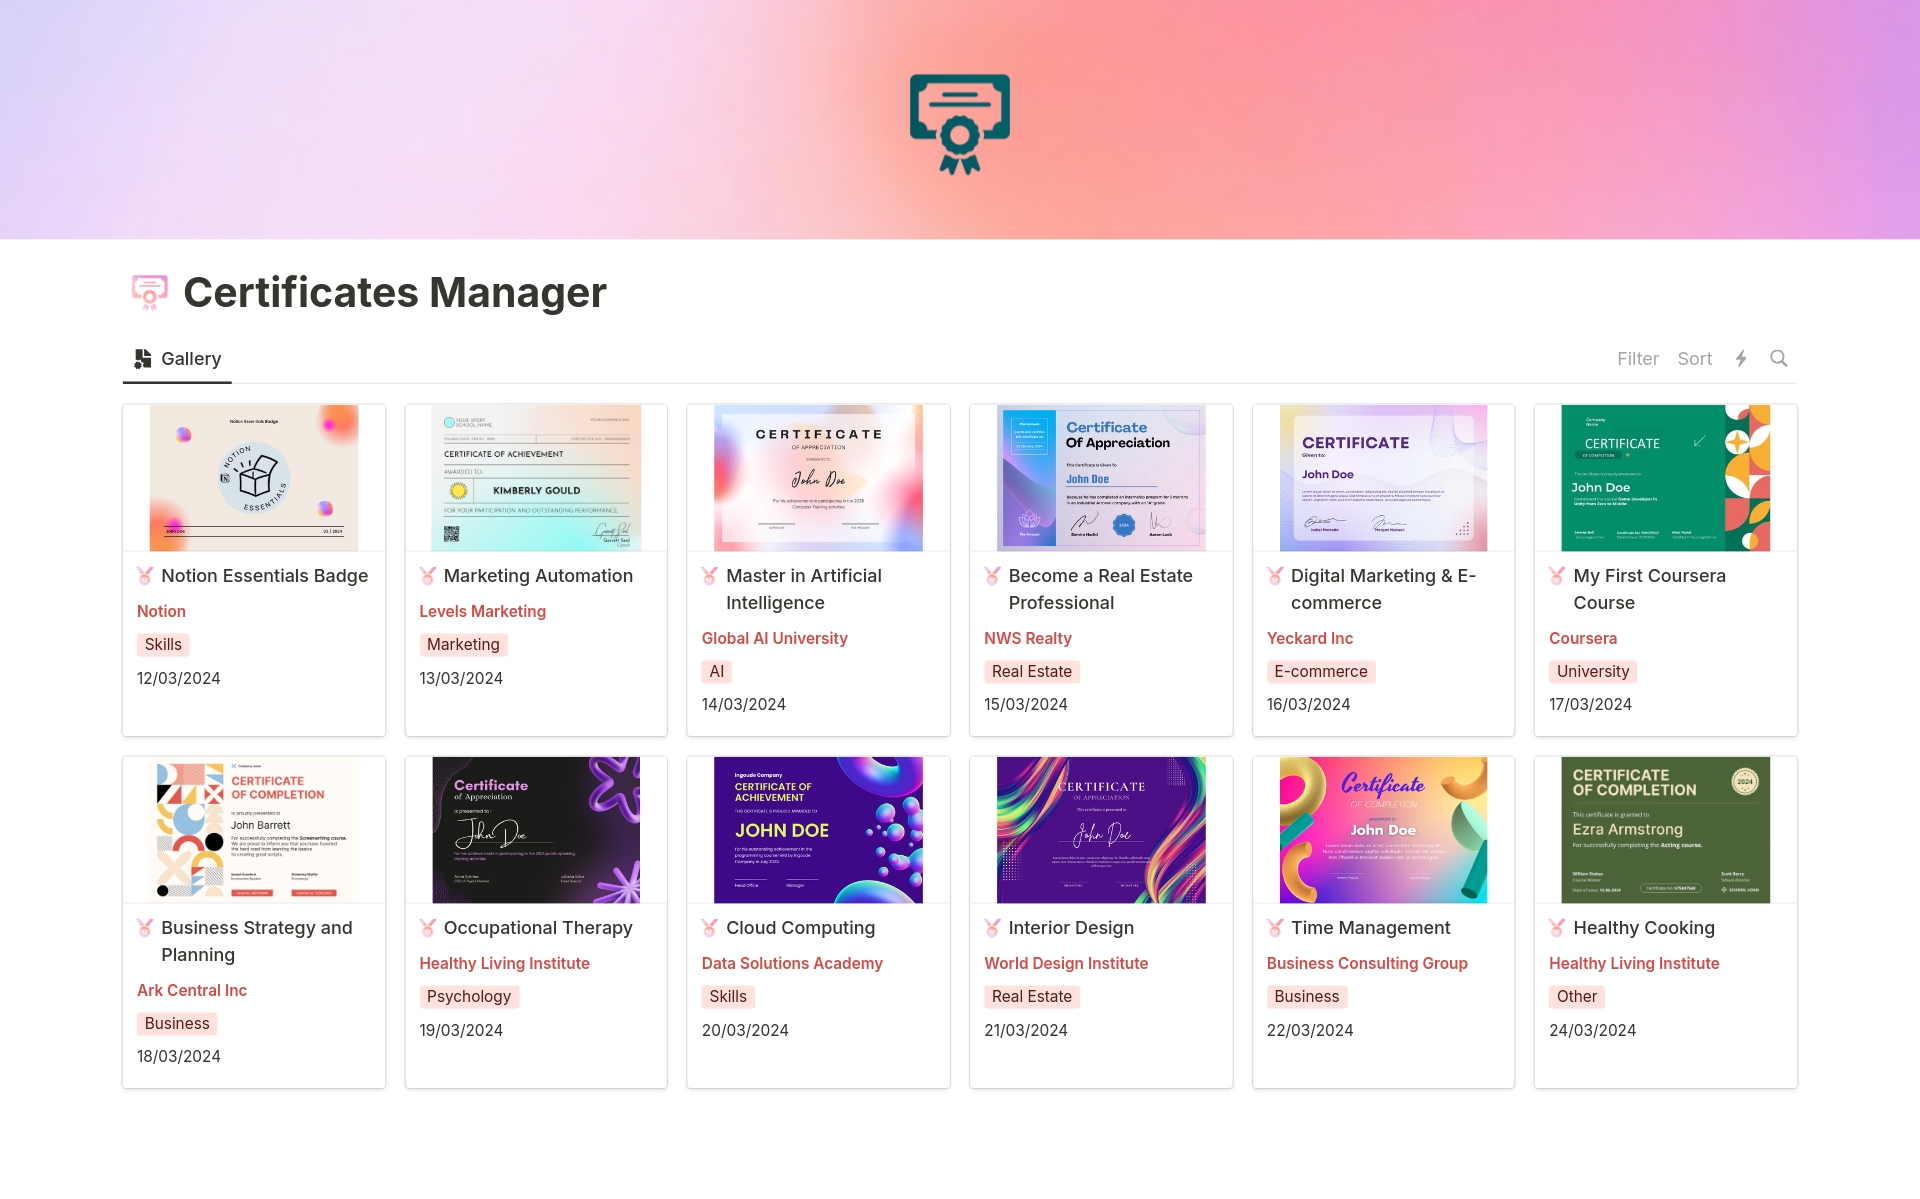 Organize, track and access your achievements in one place. Manage all your certificates by category or date, by adding an ID or URL or uploading a file. This template helps you keep your achievements organized and accessible.